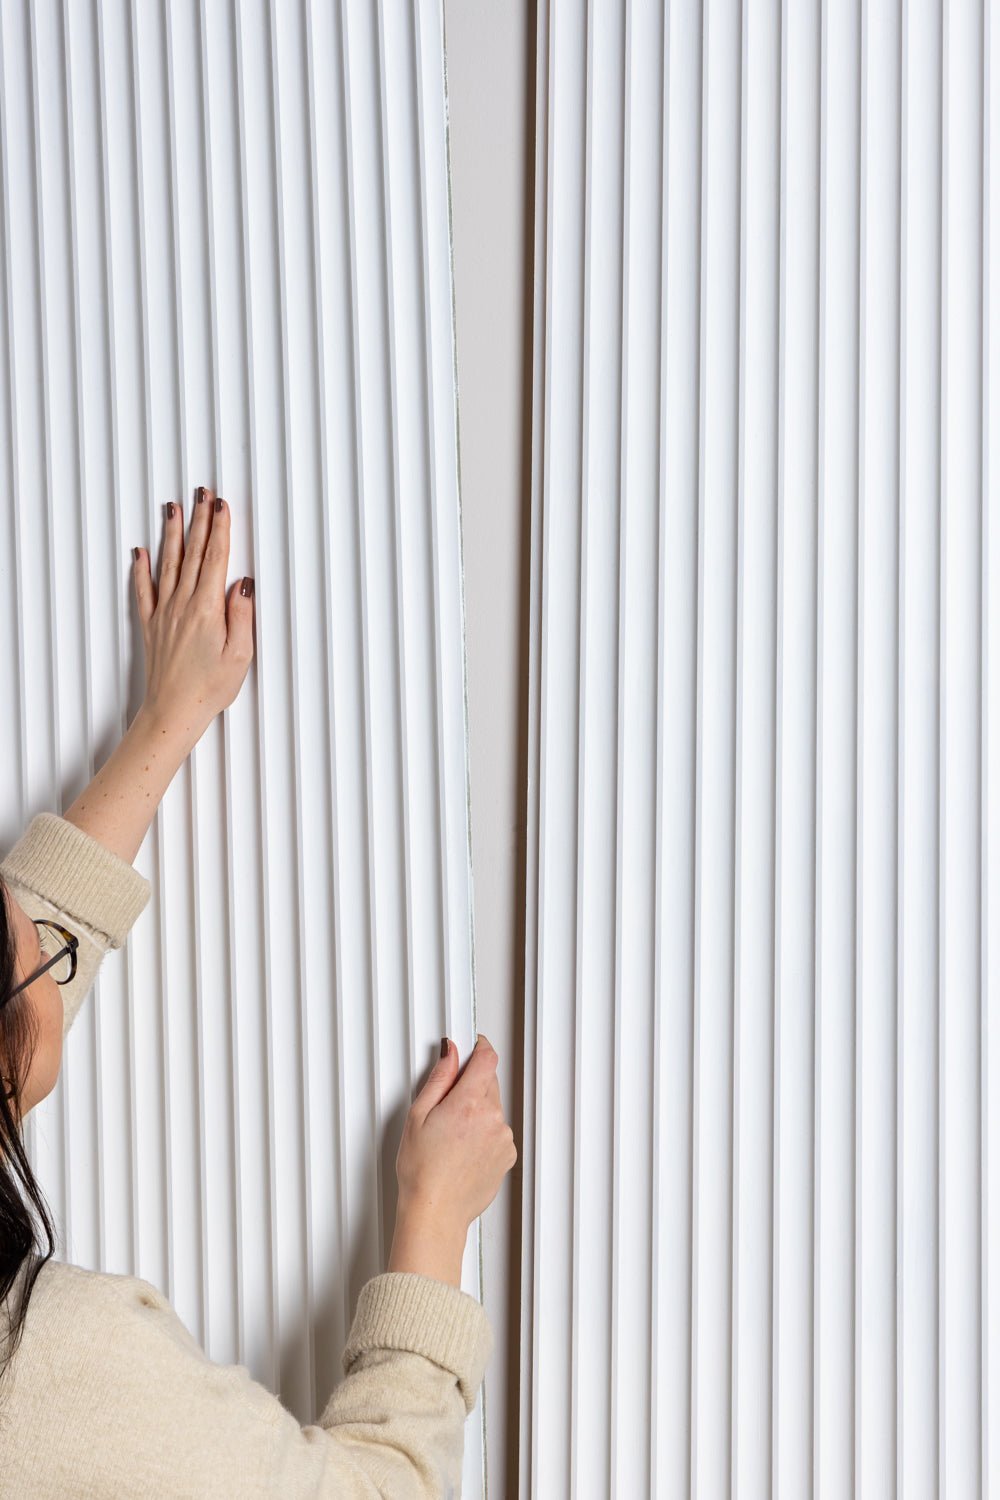 person placing primed Fluted MDF panel on wall

